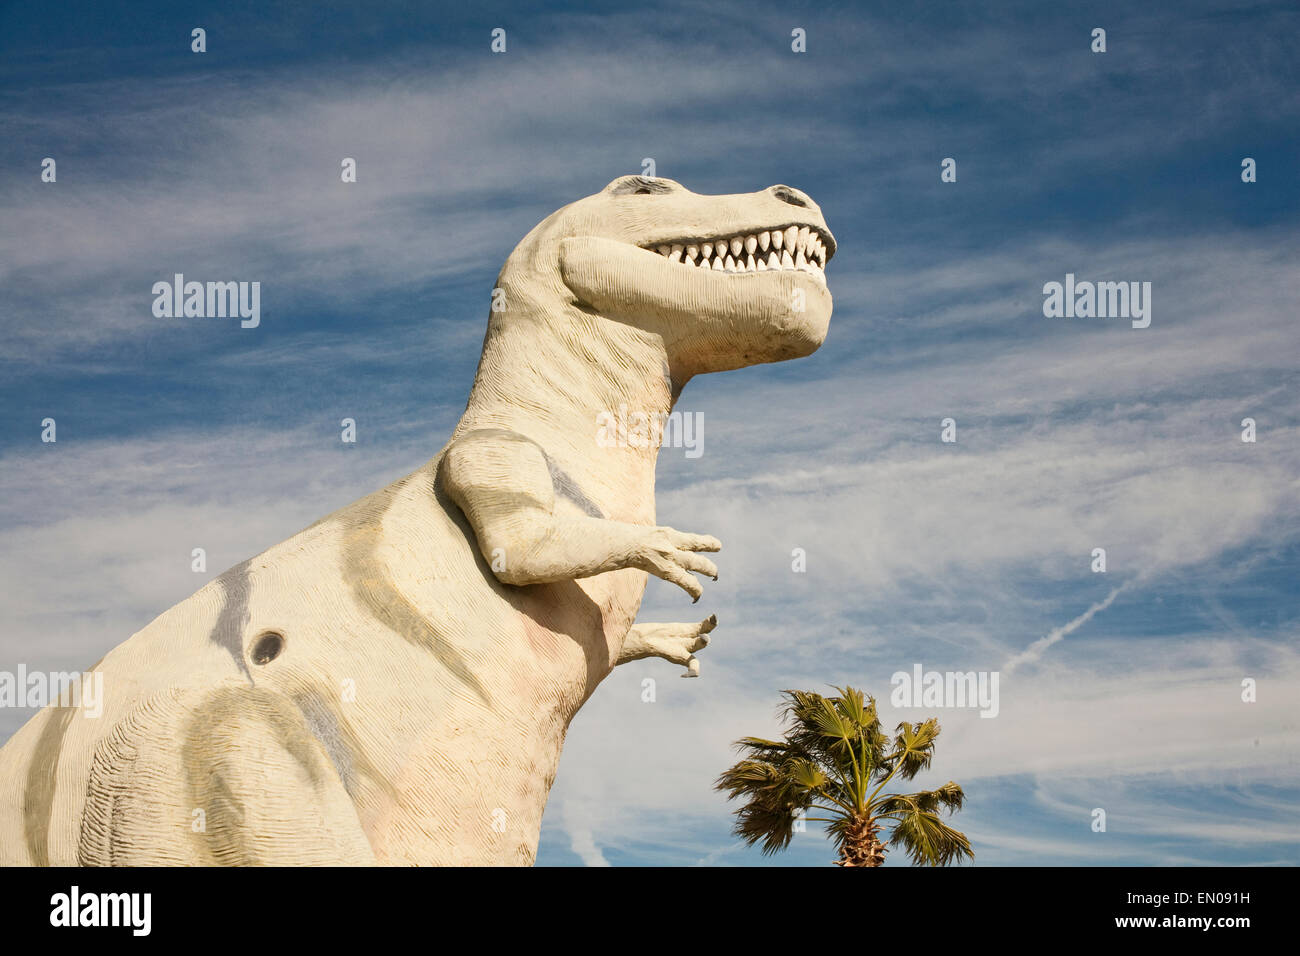 A tyrannosaurus rex statue sits in the bright sun against a blue sky in the California desert. Stock Photo